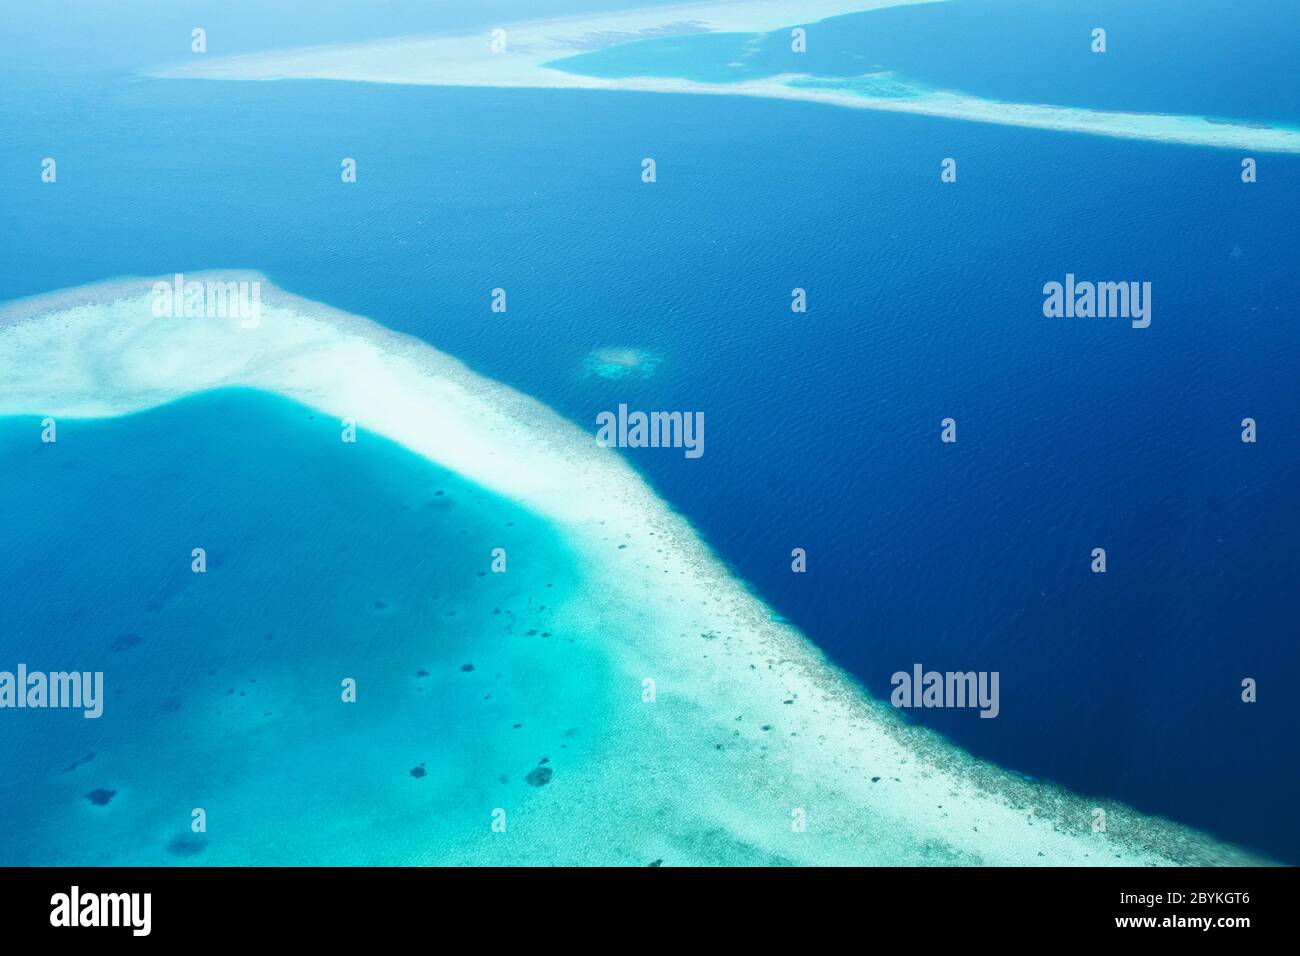 Atolls and islands in Maldives from aerial view Stock Photo